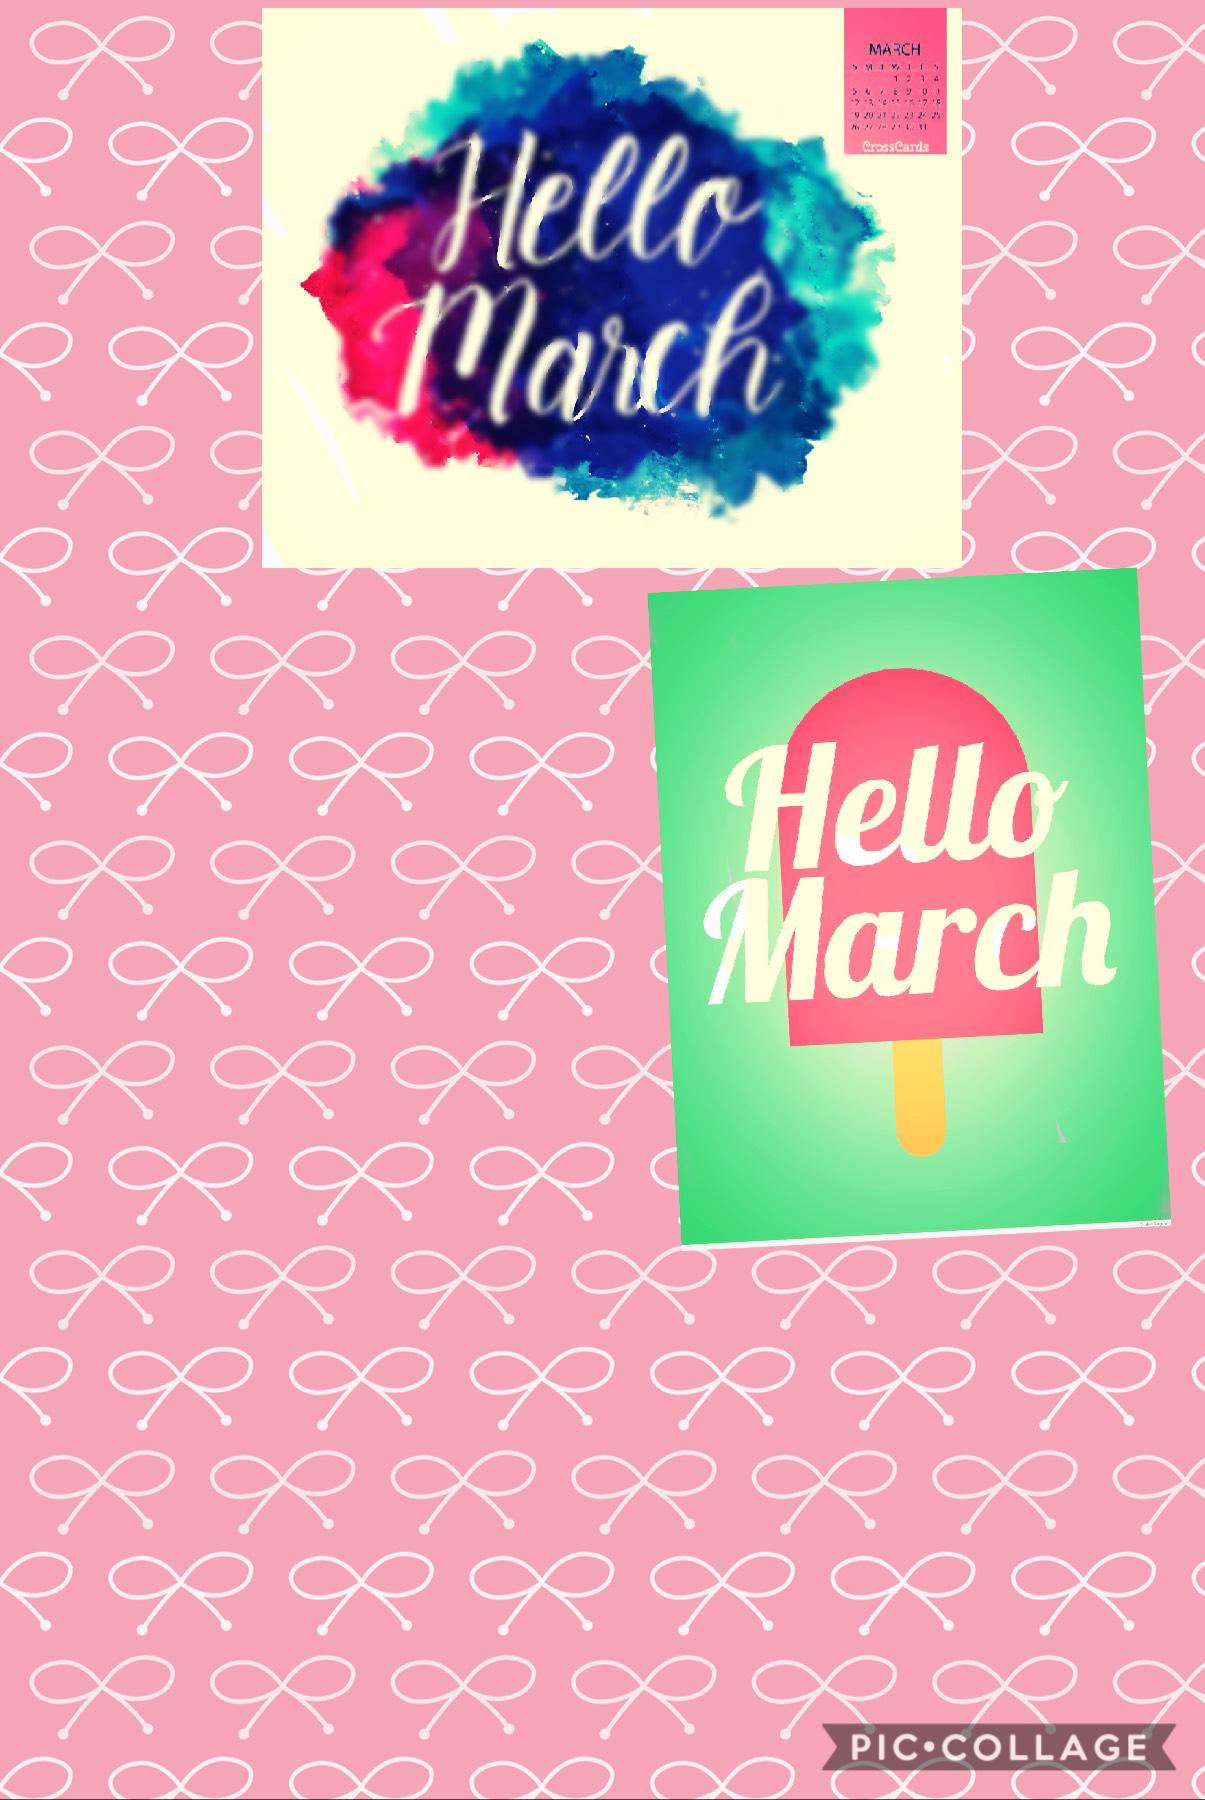 First day of March 